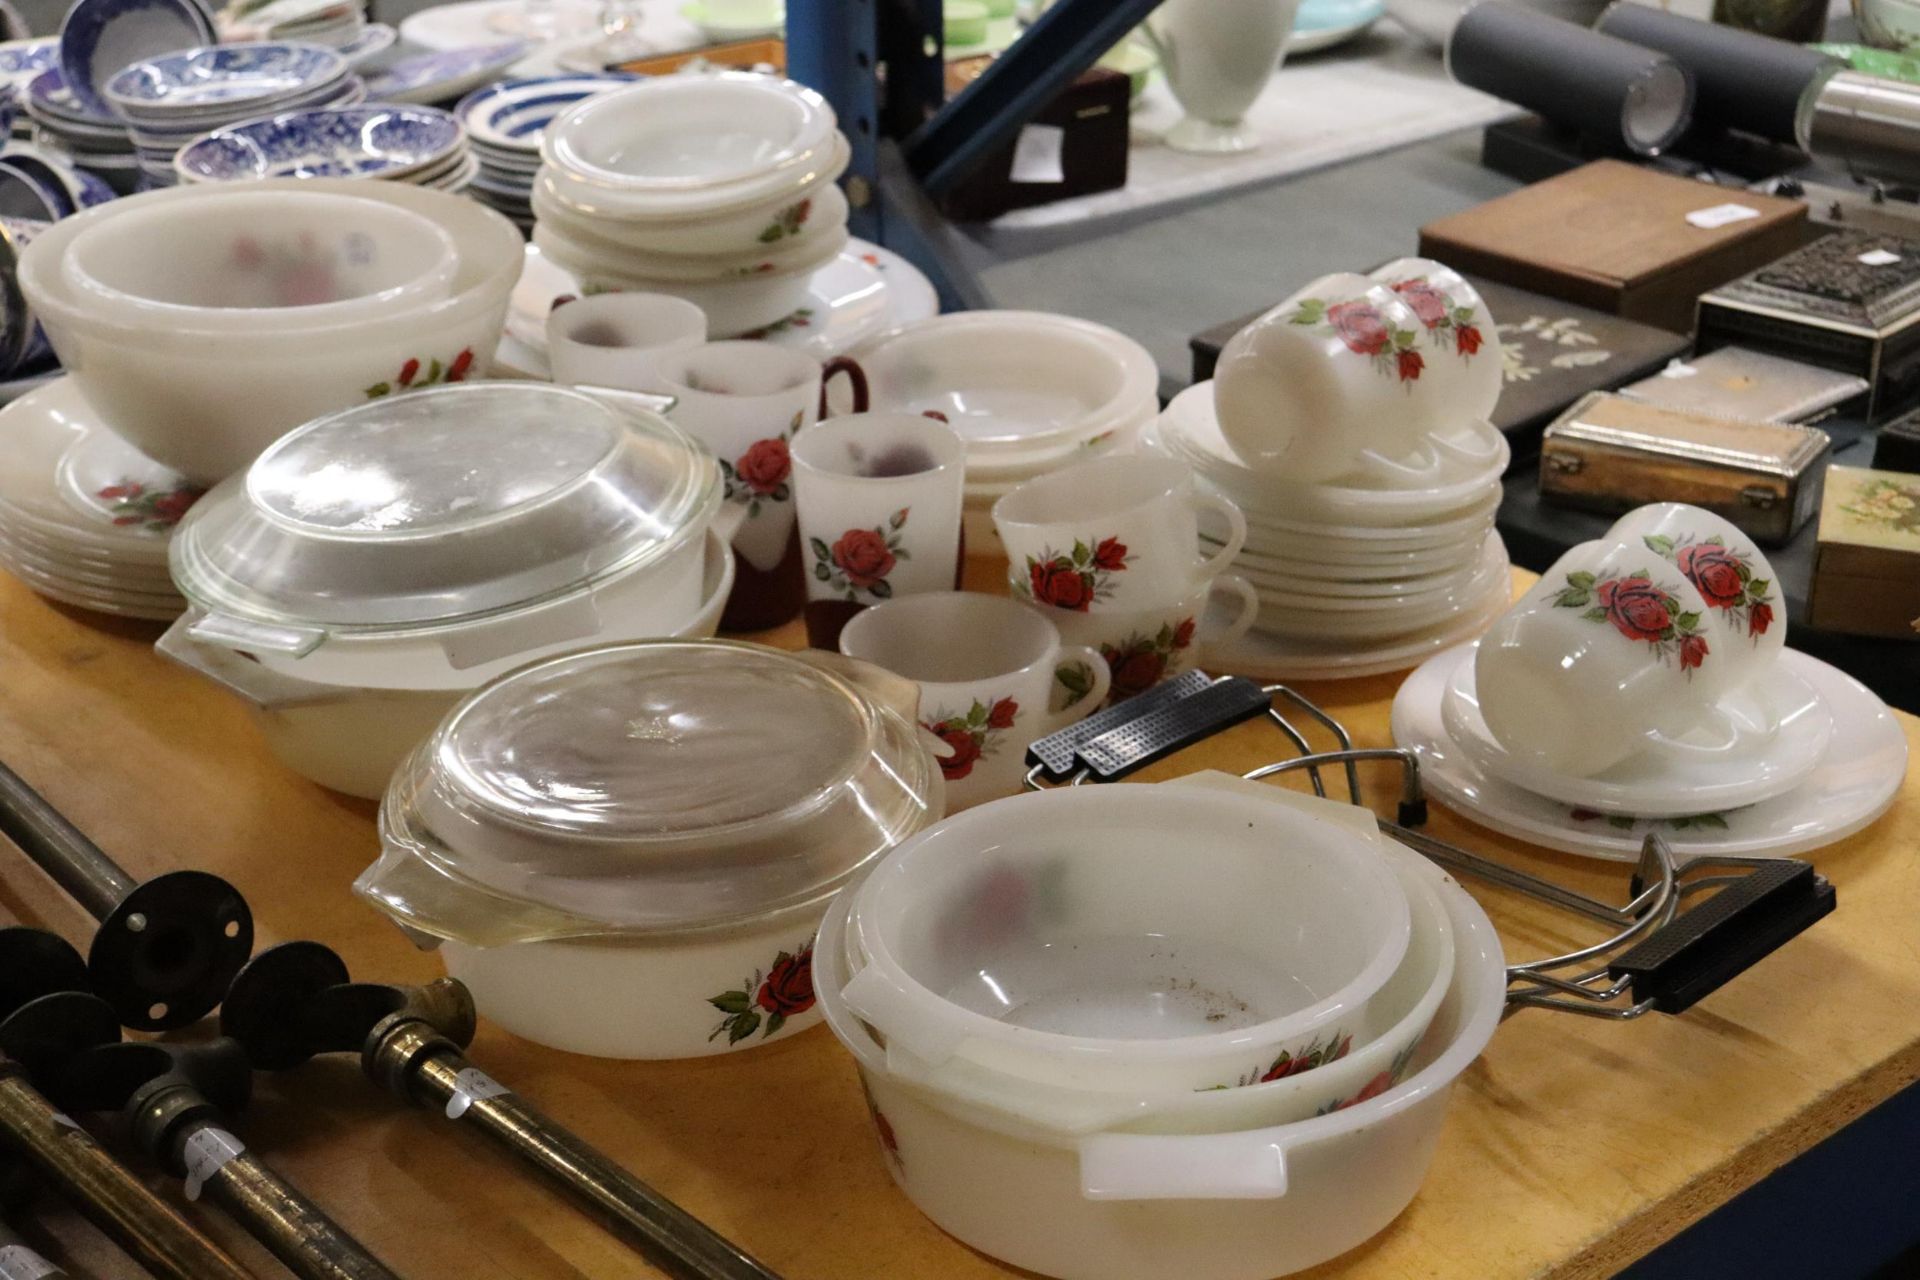 A LARGE QUANTITY OF PYREX TO INCLUDE LIDDED SERVING BOWLS, CUPS, PLATES, SAUCERS, ETC.,